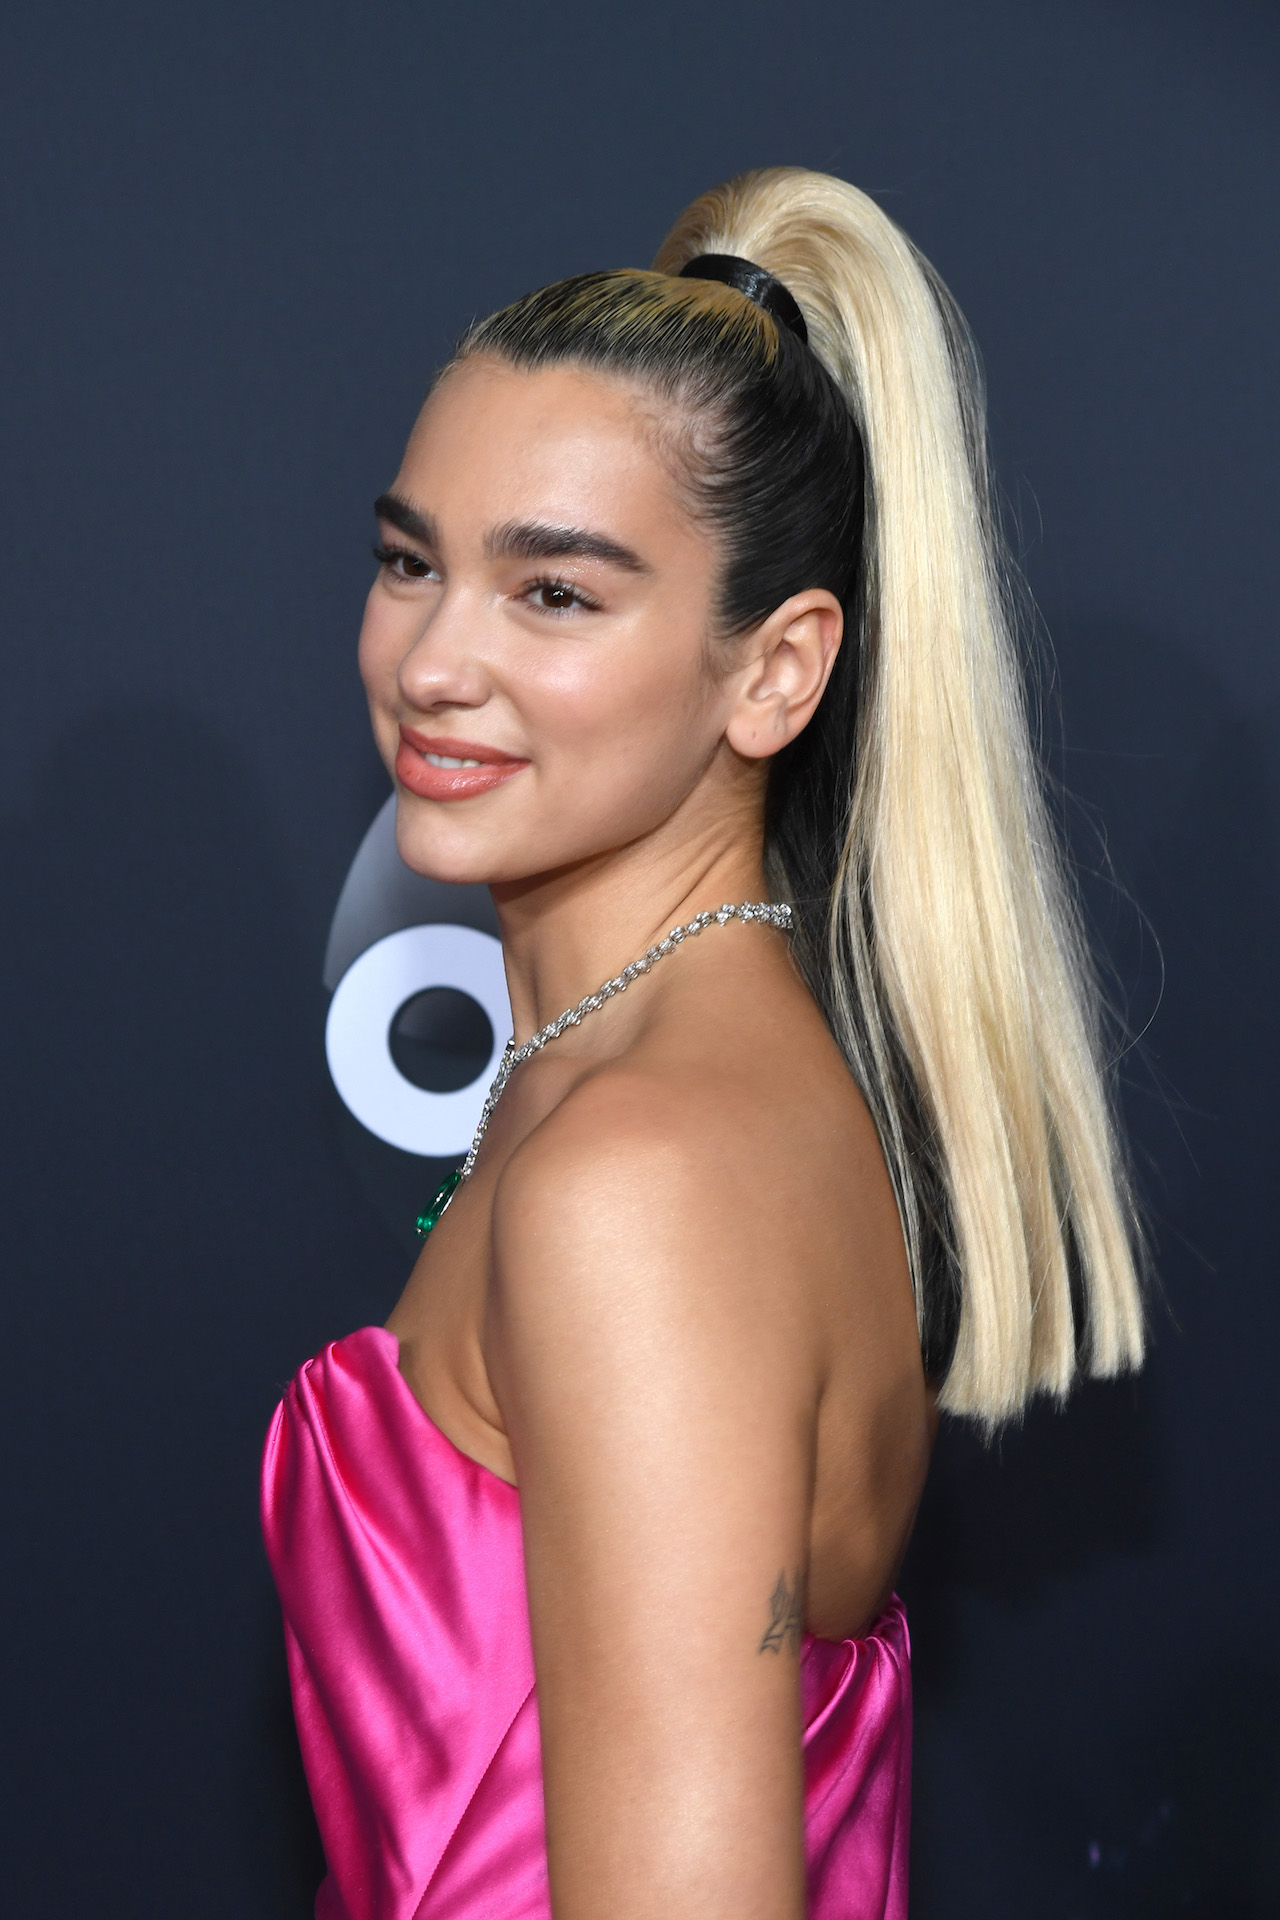 Dua Lipa wearing a bright pink satin dress with her long blonde hair in a high ponytail and dark roots showing